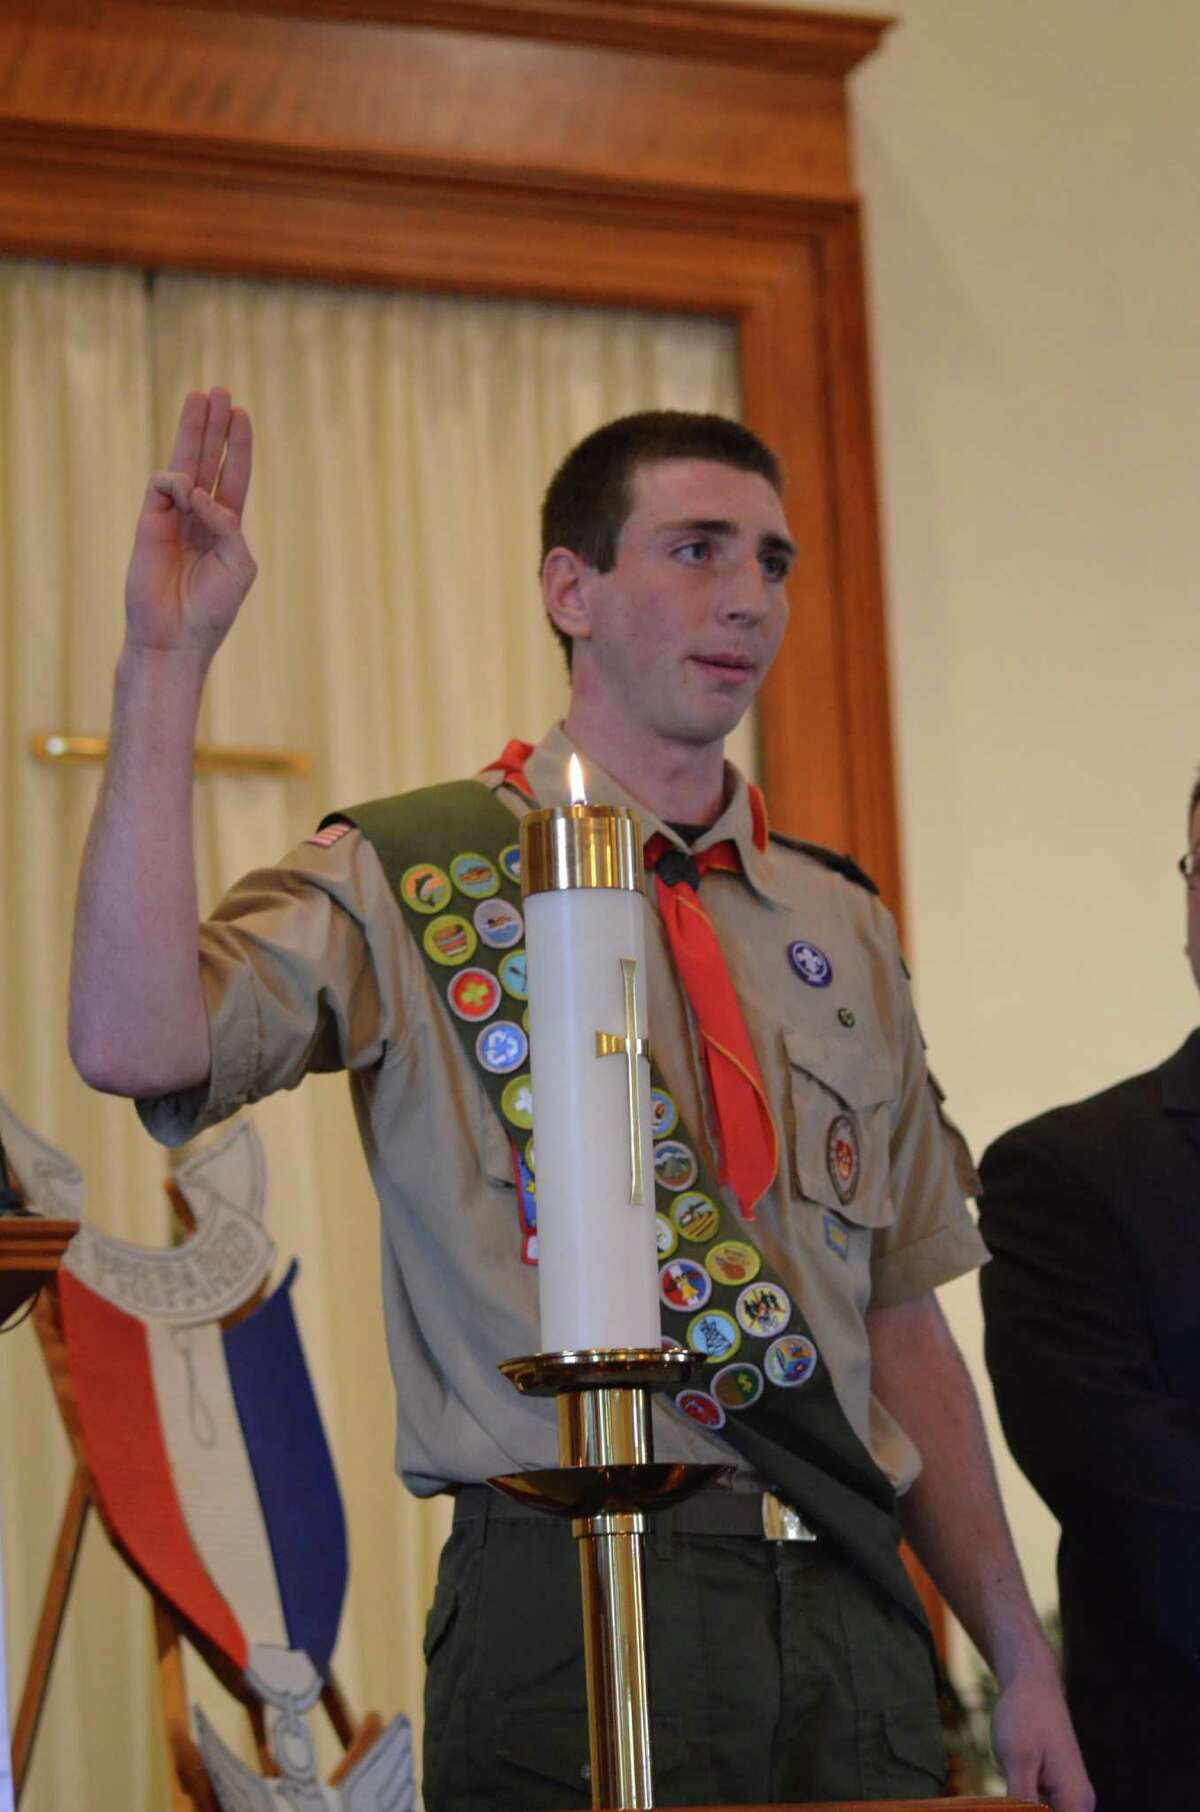 Ryan Clark, son of Mary Anne and Bill Clark, received his Eagle Scout award, earning the highest rank in scouting, at an Eagle Court of Honor held on Saturday, April 27, 2013. Ryan?s Eagle project was the design and construction of a new sidewalk for access from the parking lot to the Clergy/Choir entrance at St. Paul?s Episcopal Church on Hackett Boulevard in Albany. Utilizing the help of Scouts from Troop 149, Ryan organized a car wash to raise funds for the cement and tools needed. All work on the project was coordinated and overseen by Ryan. Scoutmaster Bob McLean presented the Eagle award to Ryan at a ceremony held at the Bethany Reformed Church, the Chartering Organization for Troop 149 in Albany. Ryan is currently a senior at Lake George High School and will attend Marist College in the Fall. (Mary Anne Clark)